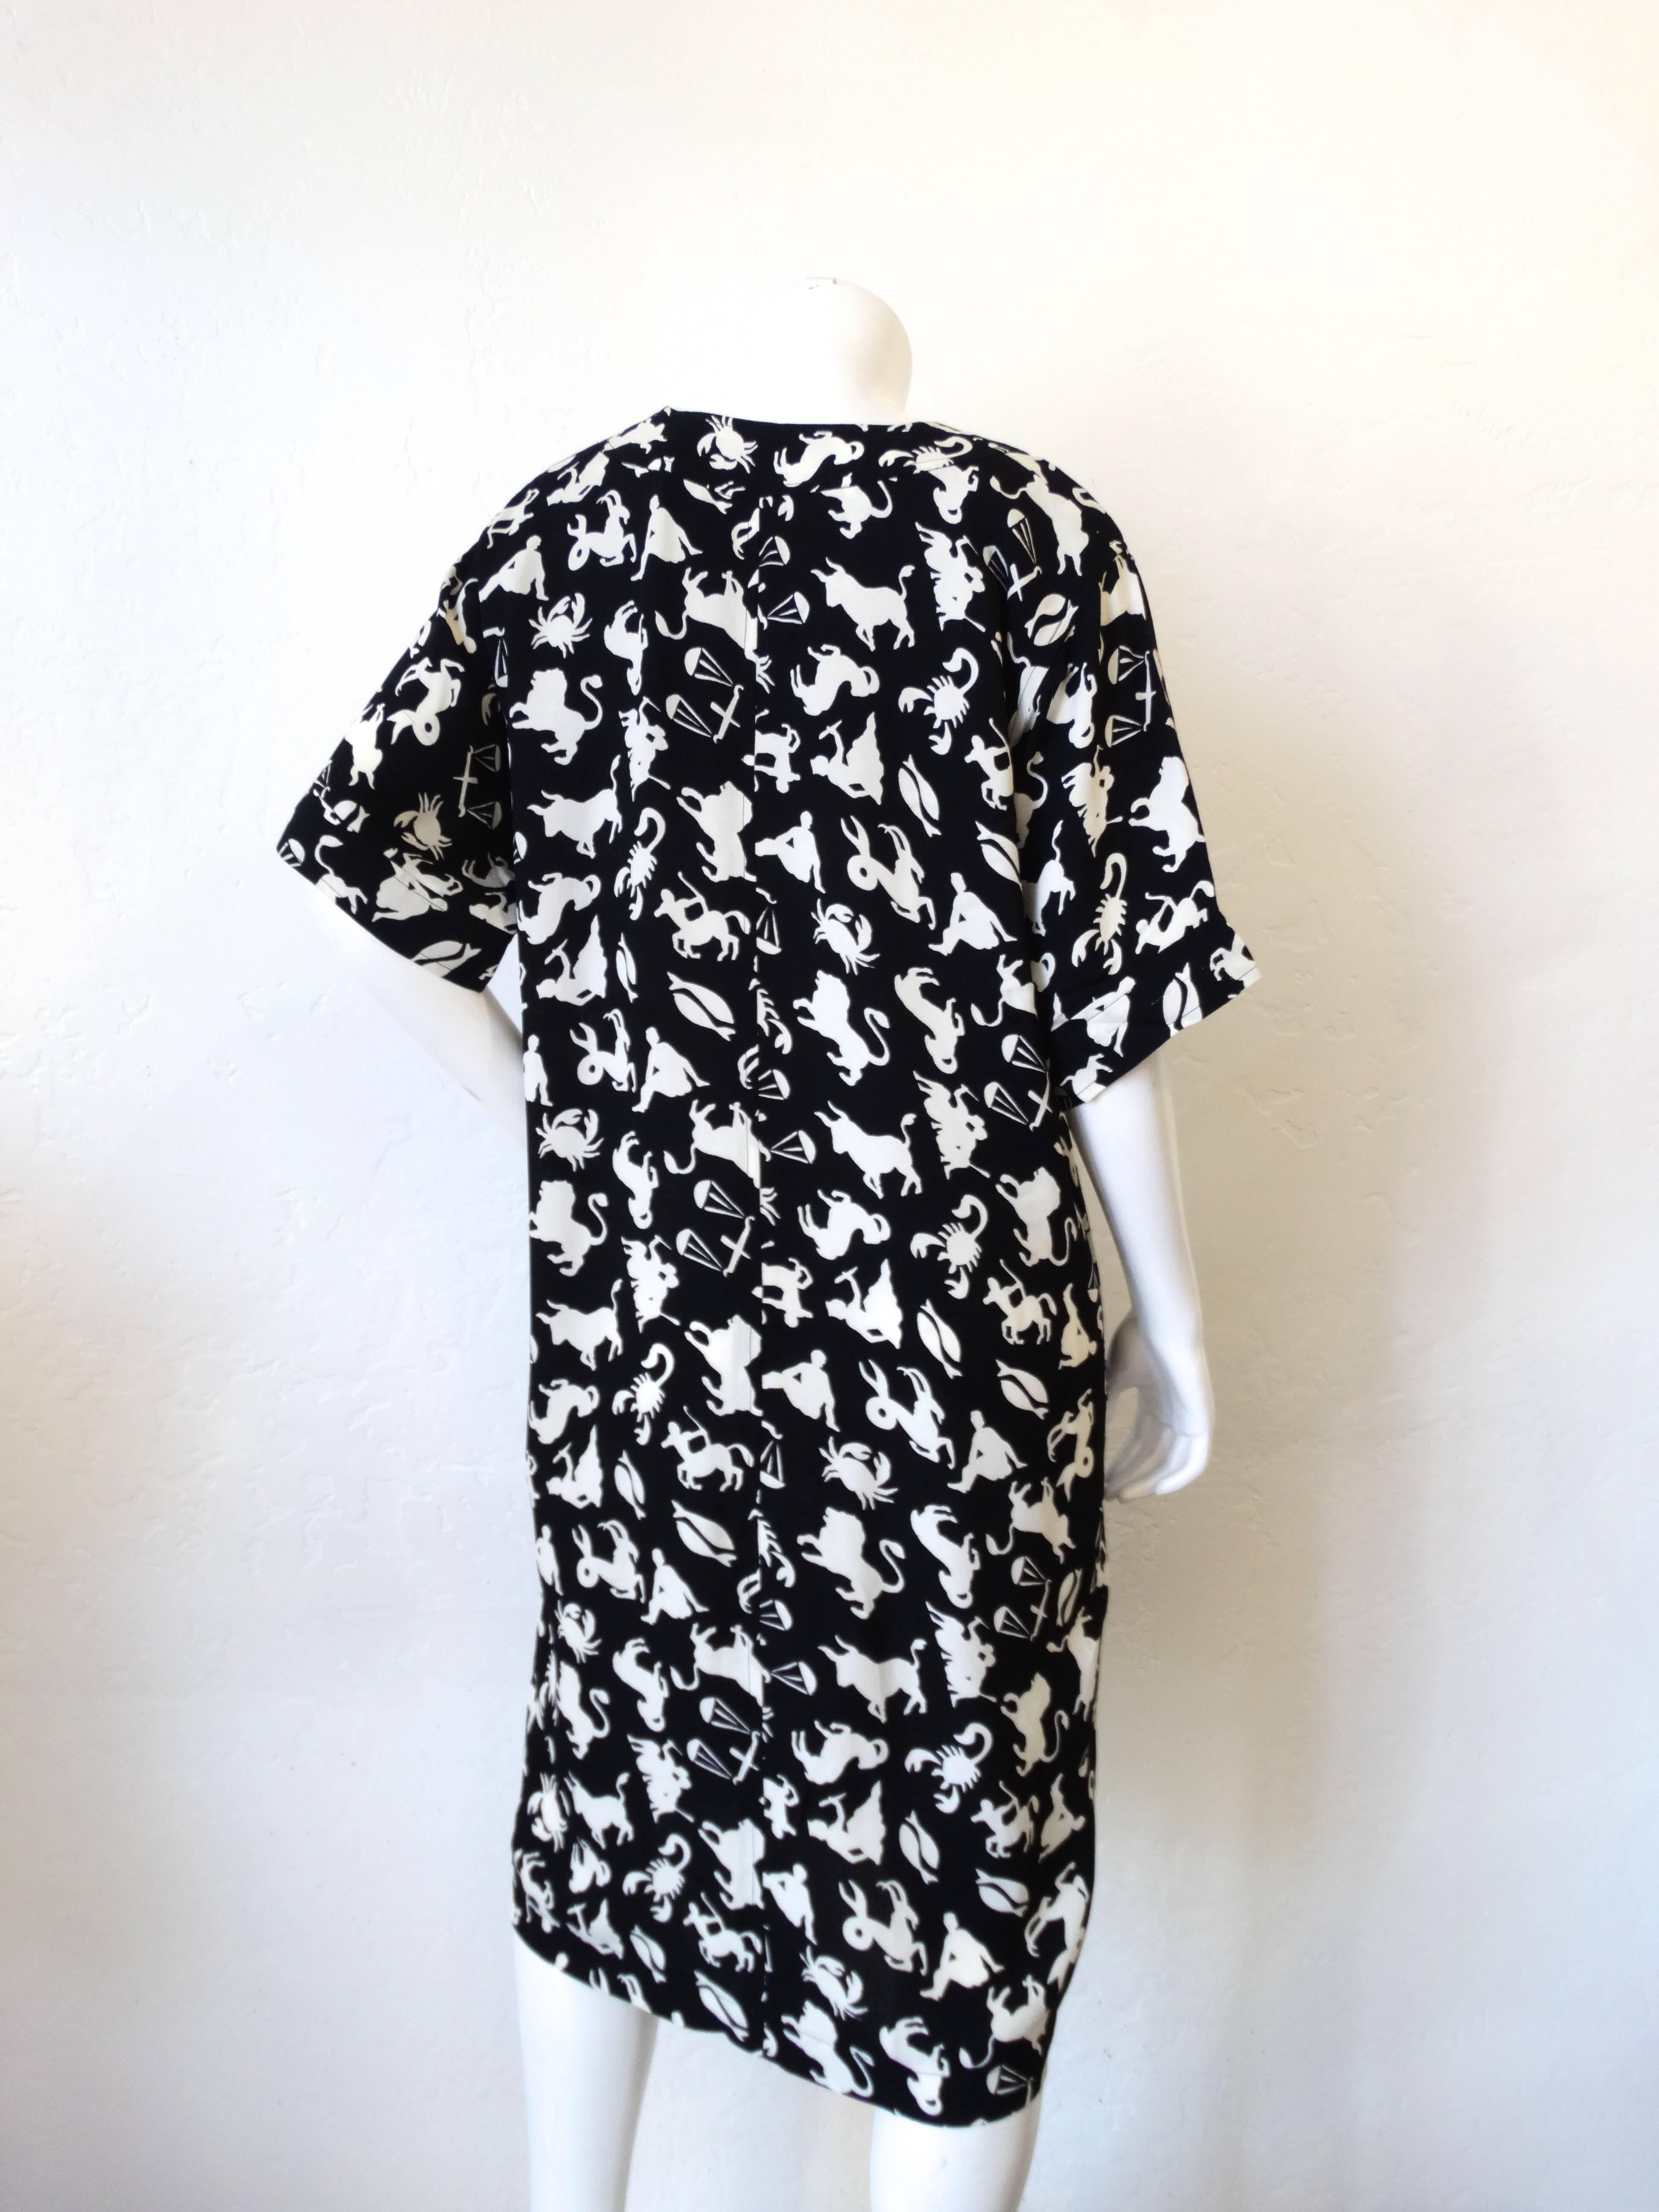 What's your sign? Whichever it is- it's on this dress! This incredible printed dress is from iconic designer Saint Laurent! Black and white astrology inspired zodiac all over print. Shift dress construction with short flowing sleeves! Looks cute